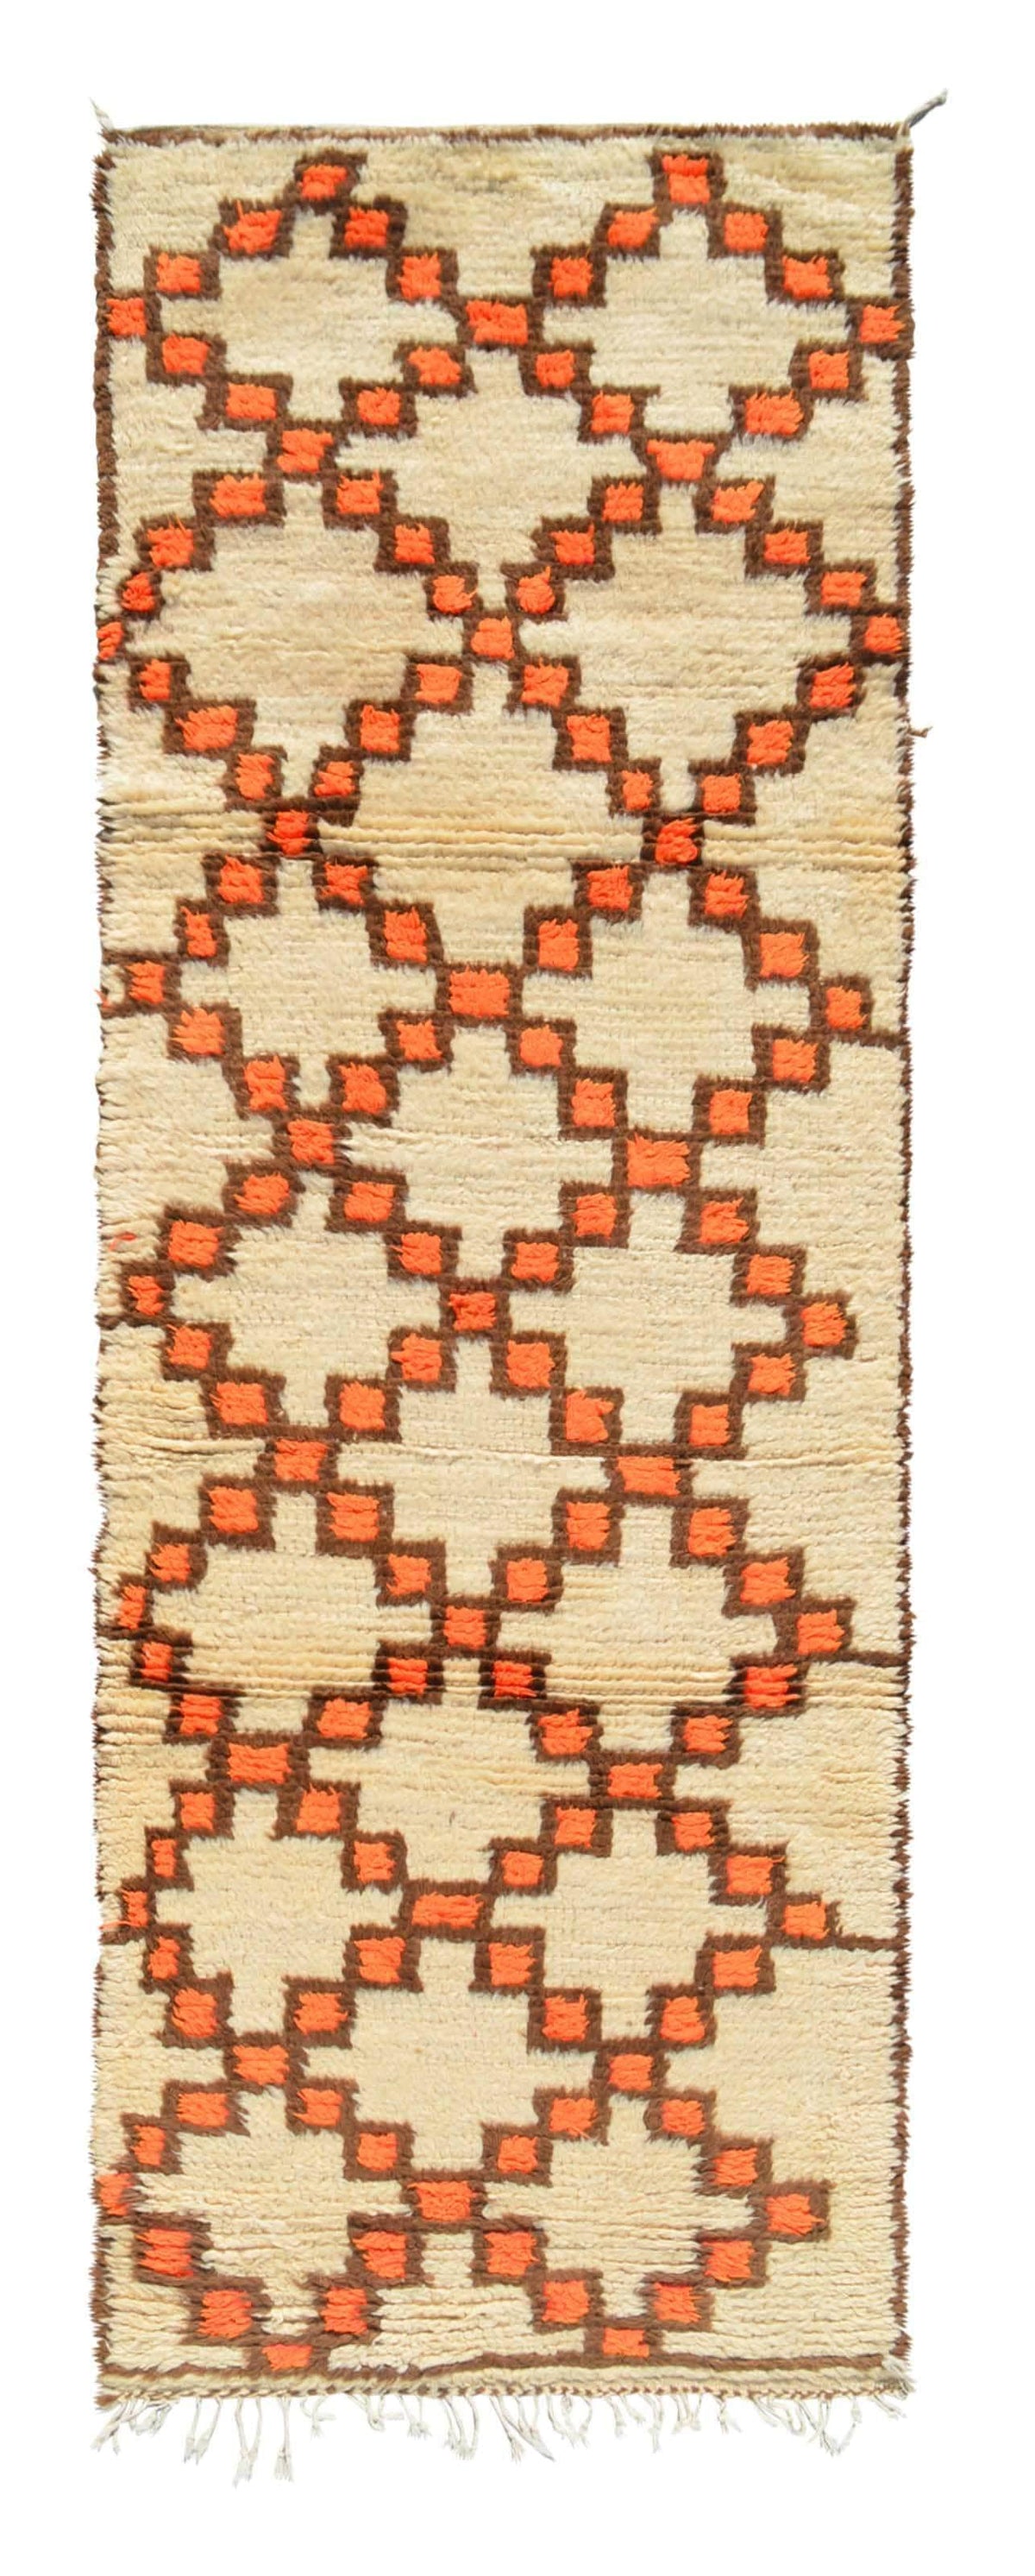 Vintage Moroccan Rug Red And White Vintage Rug | Vintage Moroccan Rug   illuminate collective 